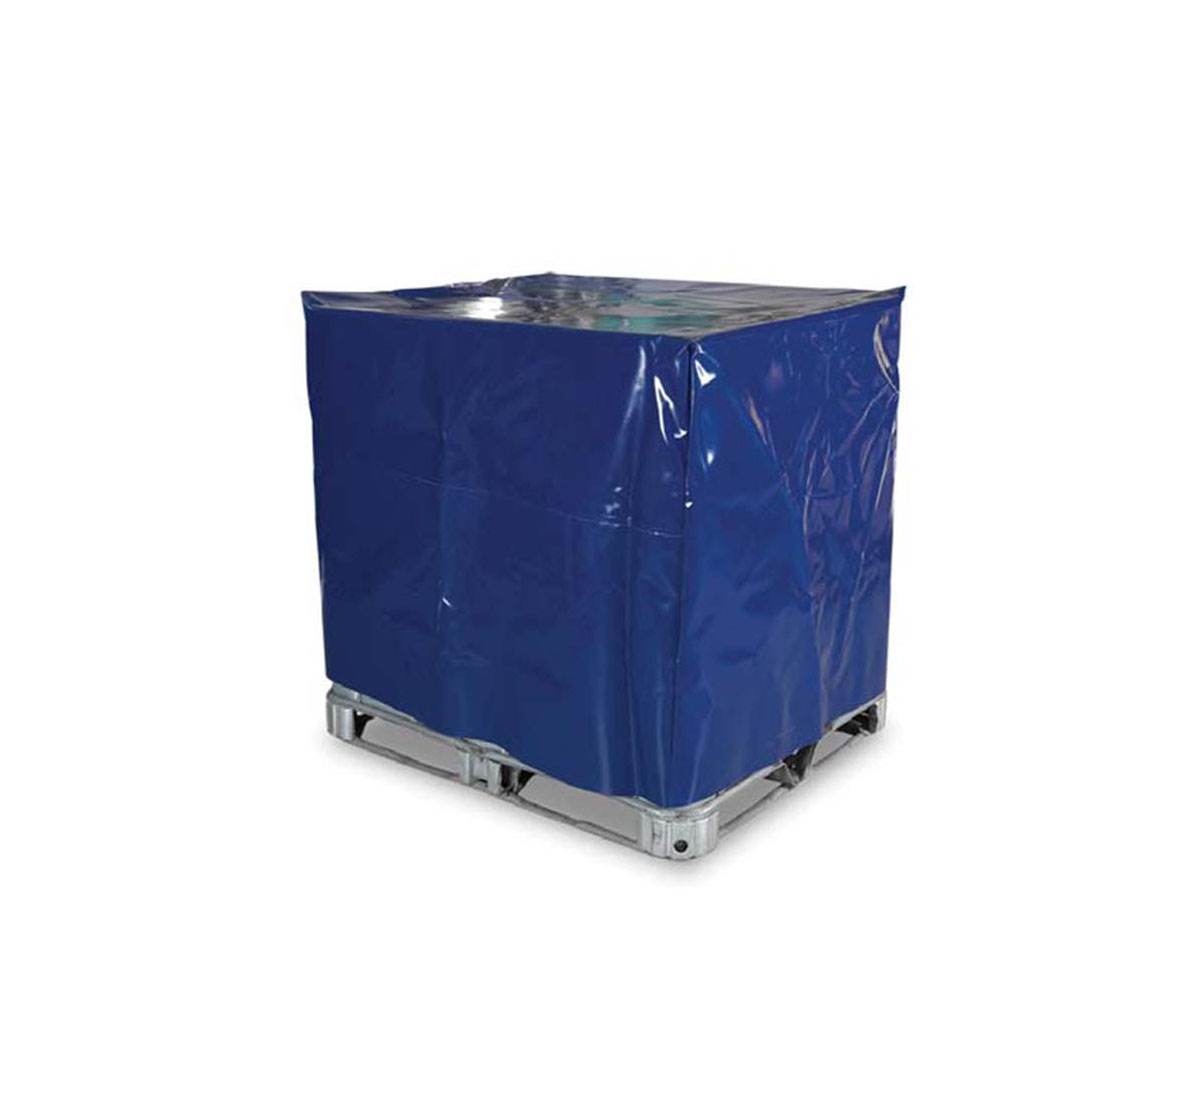 A picture of a protection cover for IBC containers with casing of PVC